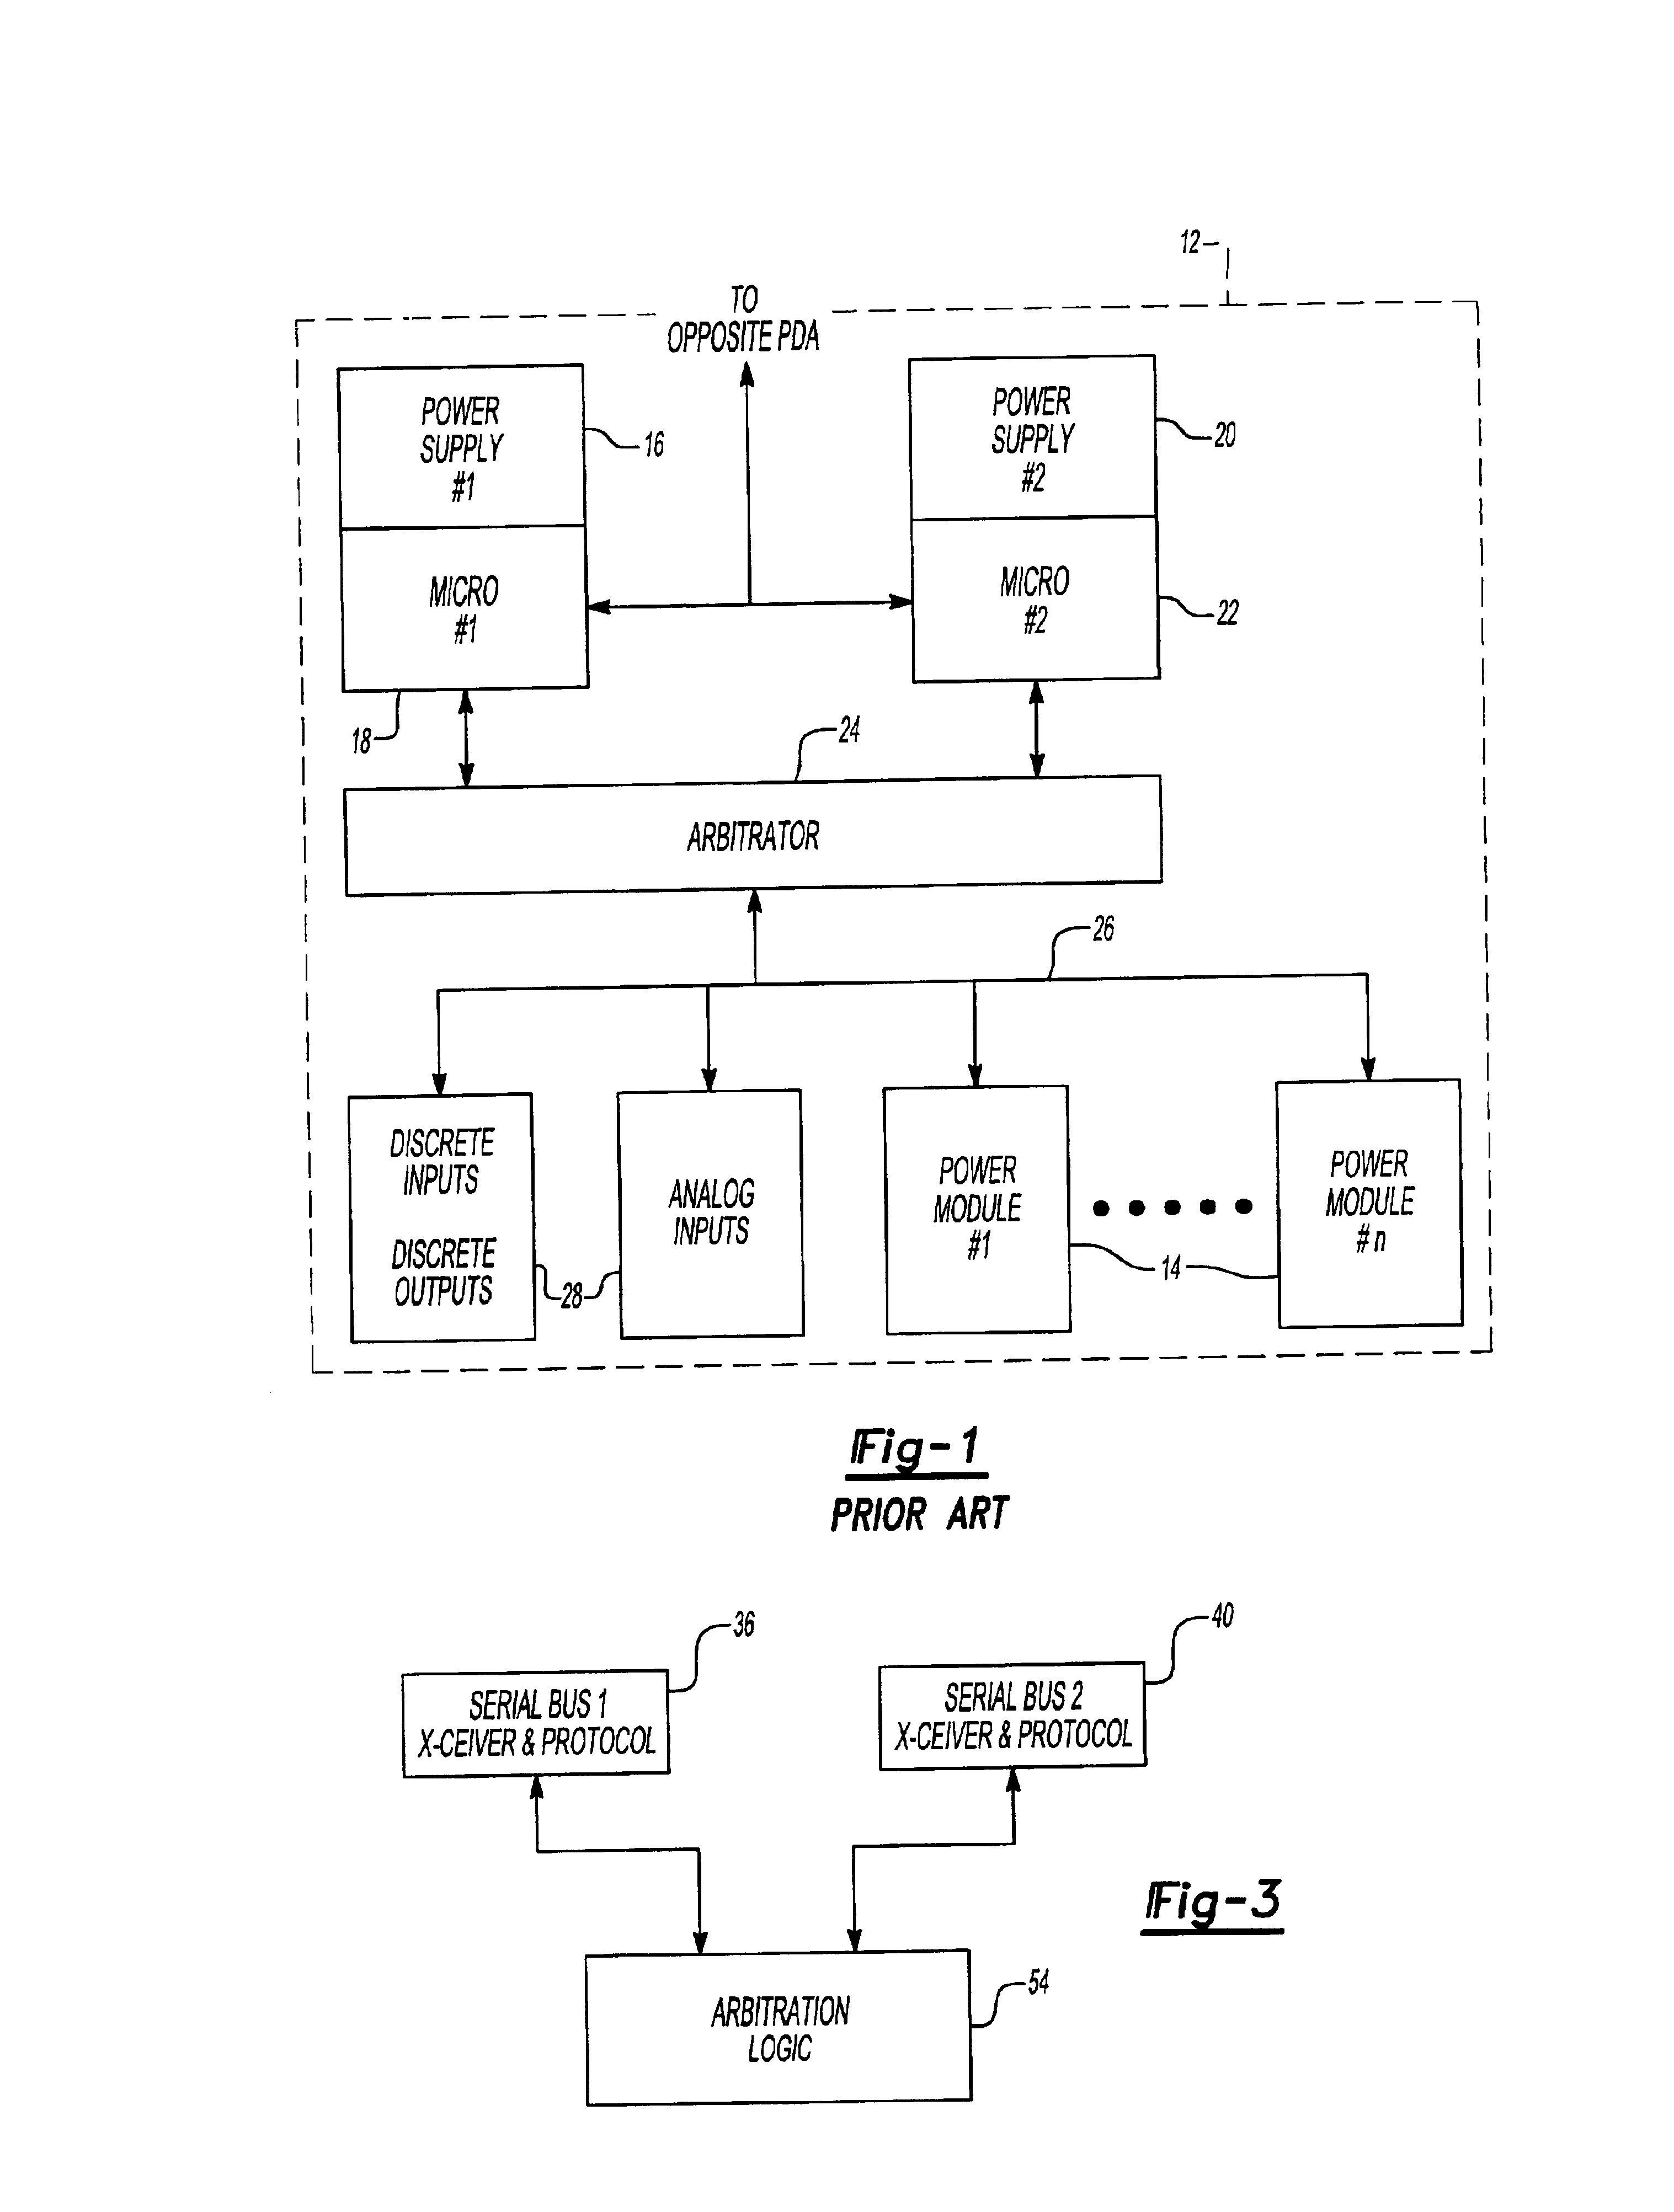 Power distribution assembly with redundant architecture